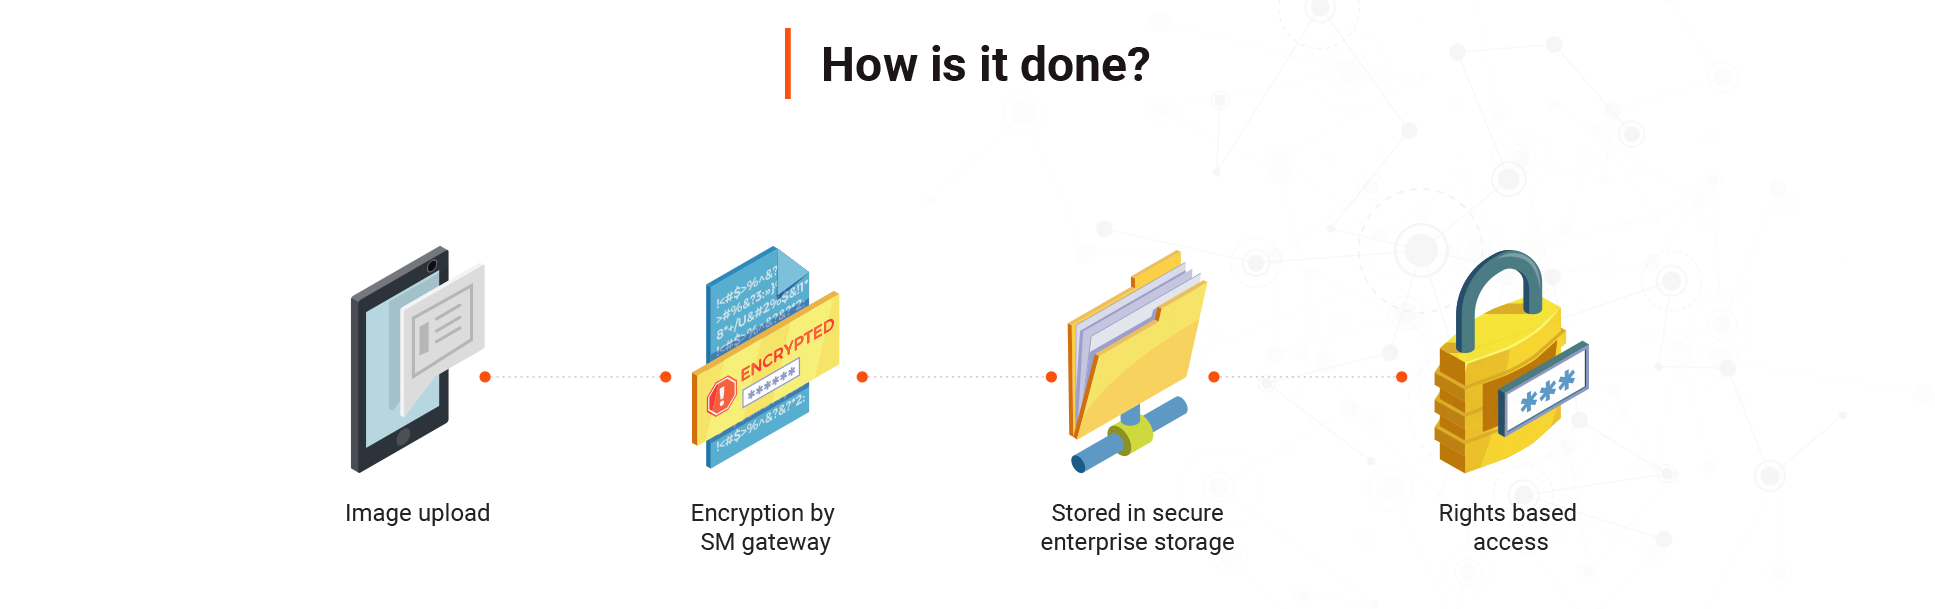 How is it done? 1. Imgae Upload 2. Encryption by SM gateway 3. Stored in secure enterprise storage 4. Rights based access